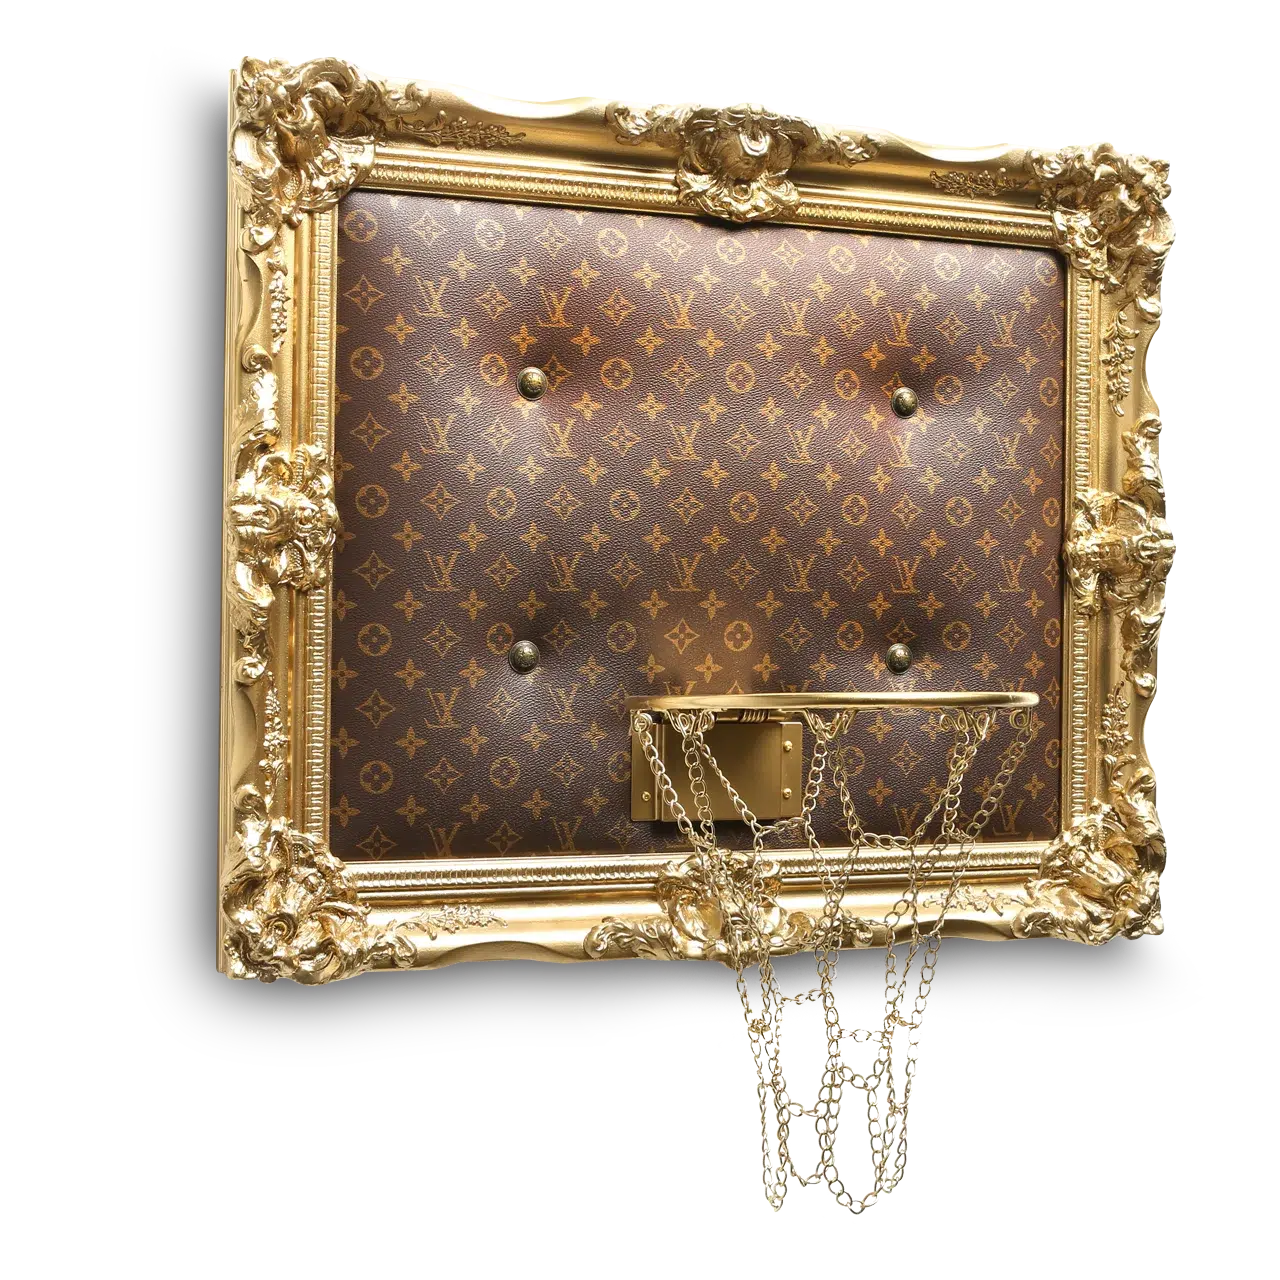 Luxury fashion brand, Louis Vuitton, introduces the chic and elegant Hoop accessory.